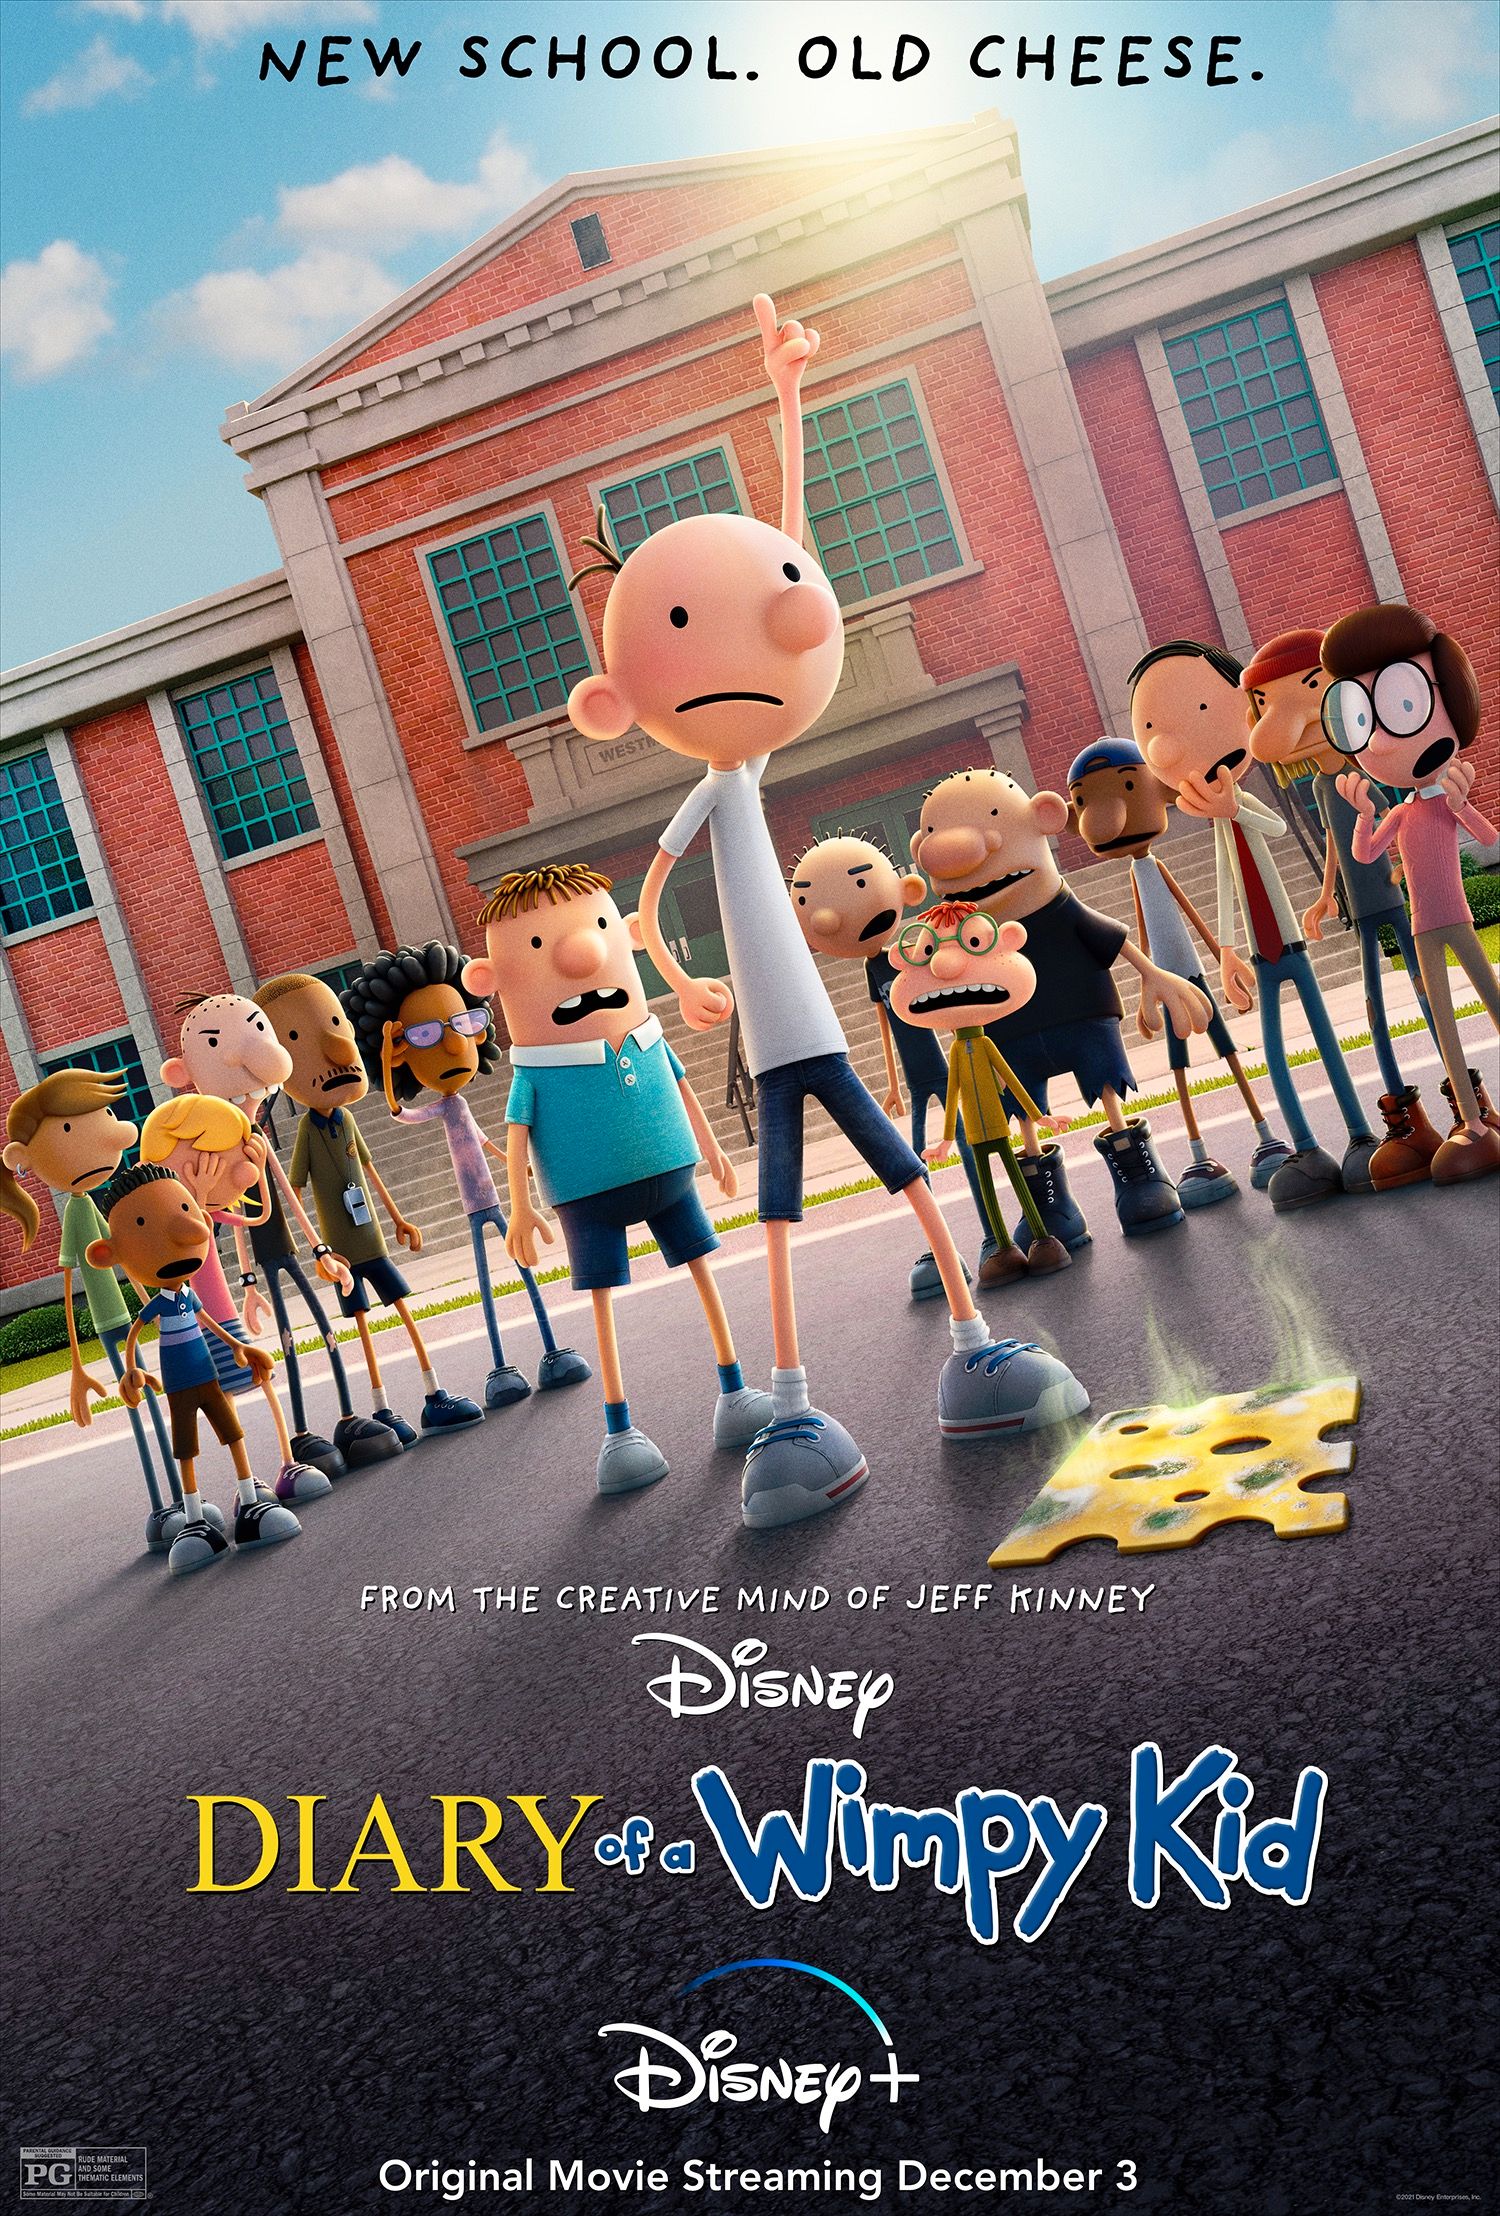 Where to watch Diary of a Wimpy Kid